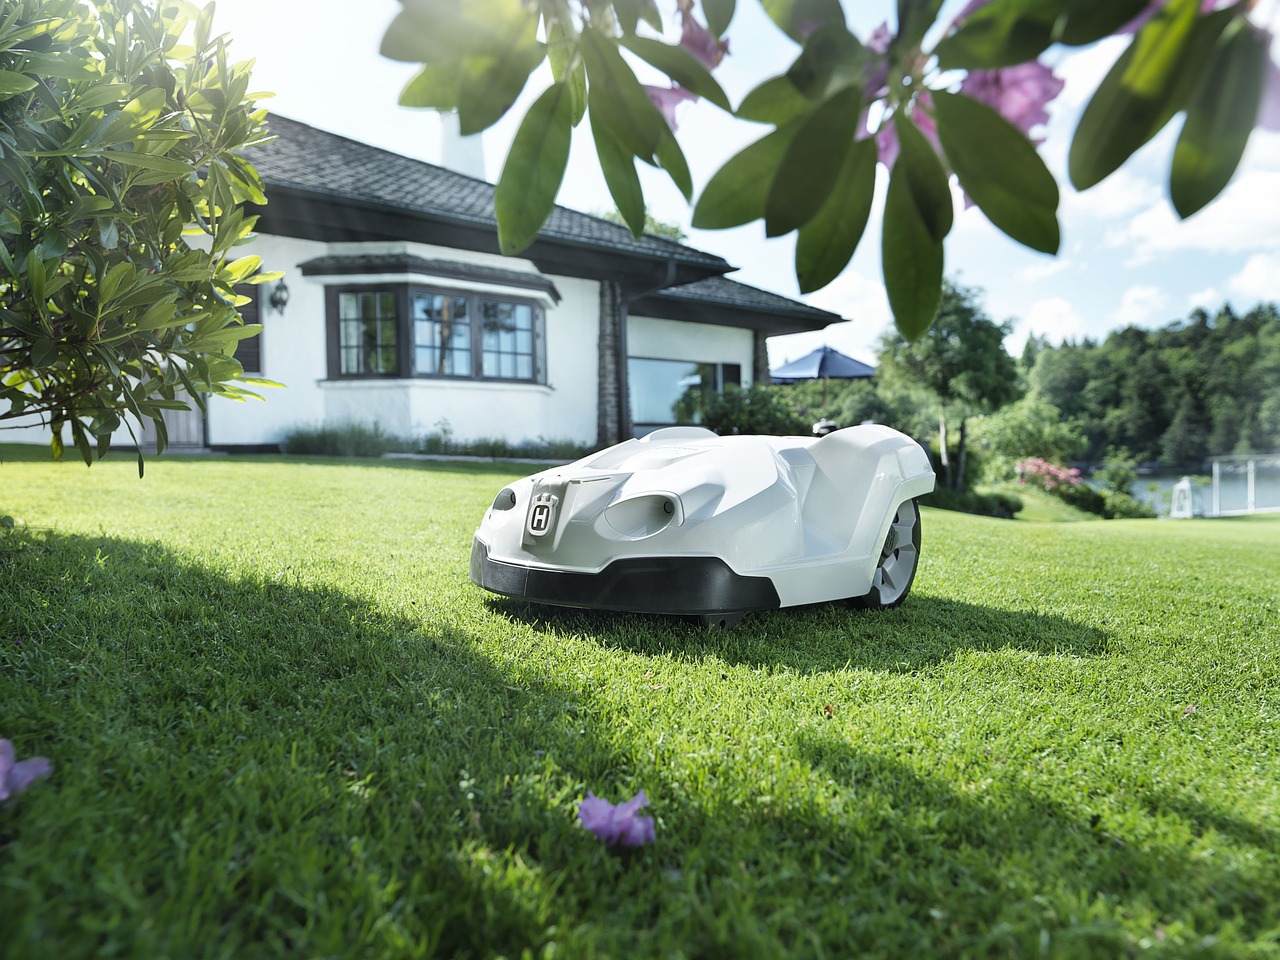 Tech Gadgets for Lawns and Gardens